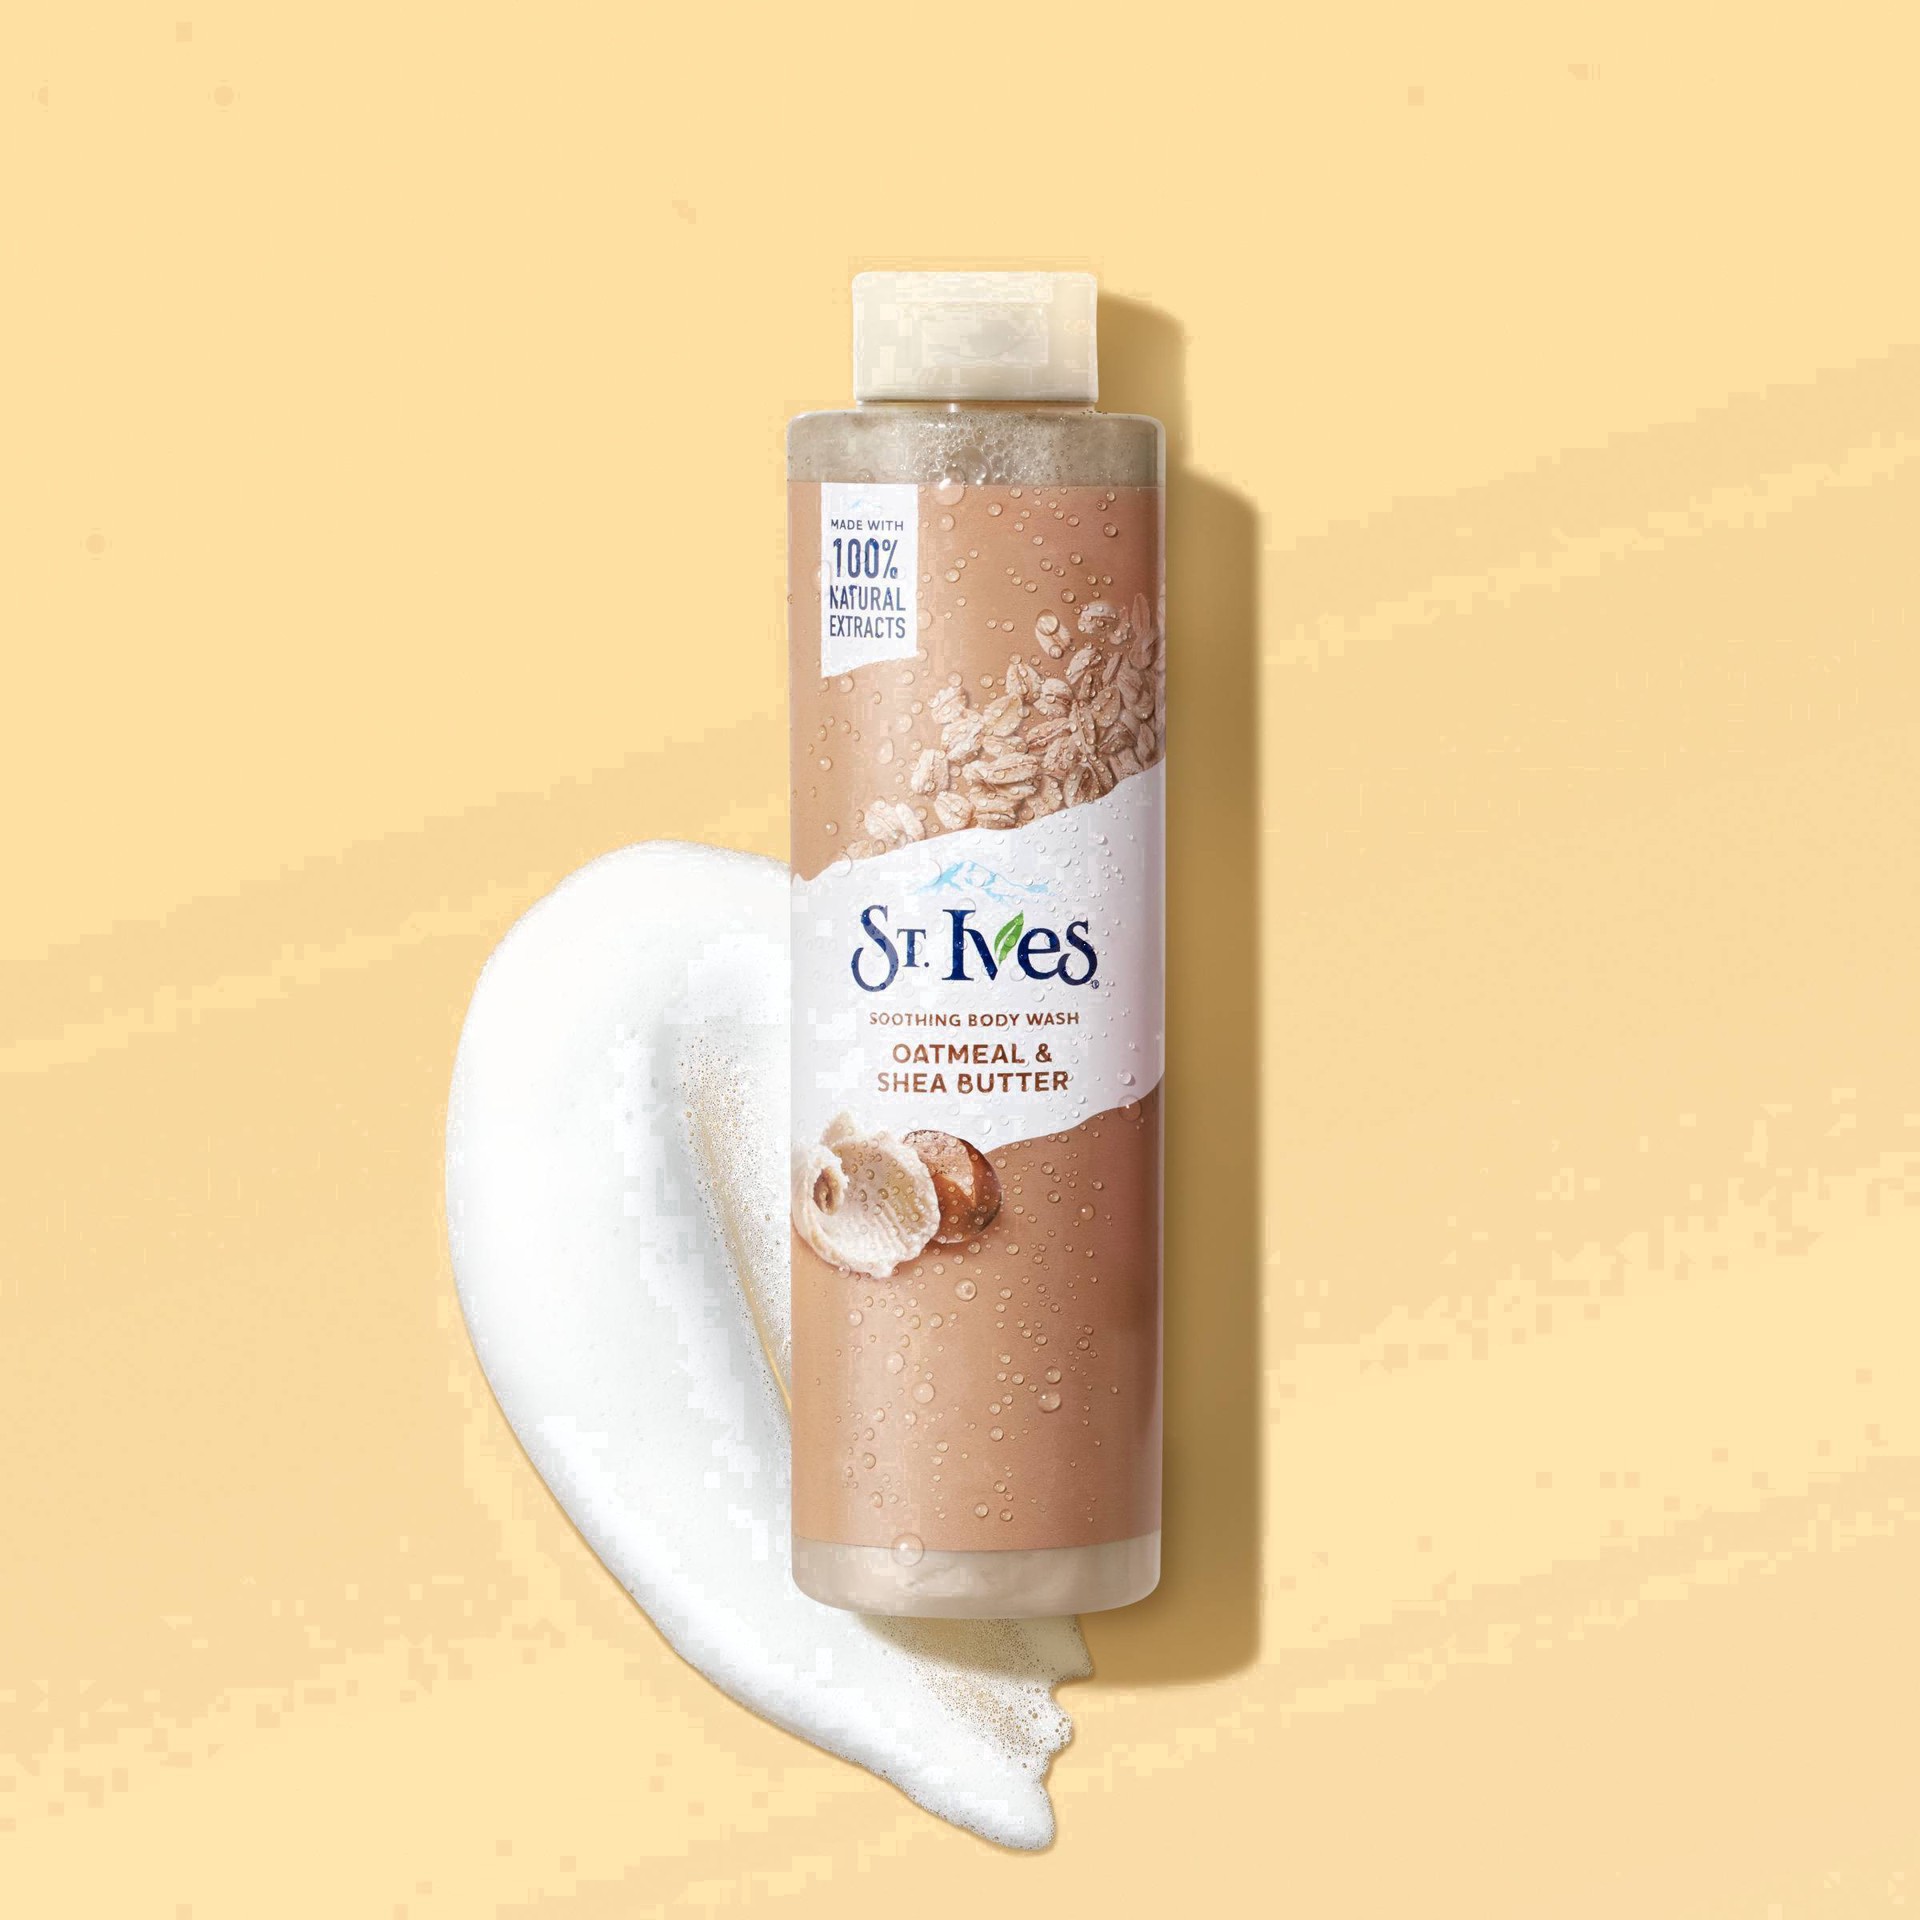 slide 21 of 103, St. Ives Soothing Body Wash Oatmeal & Shea Butter, 22 oz, 22 oz